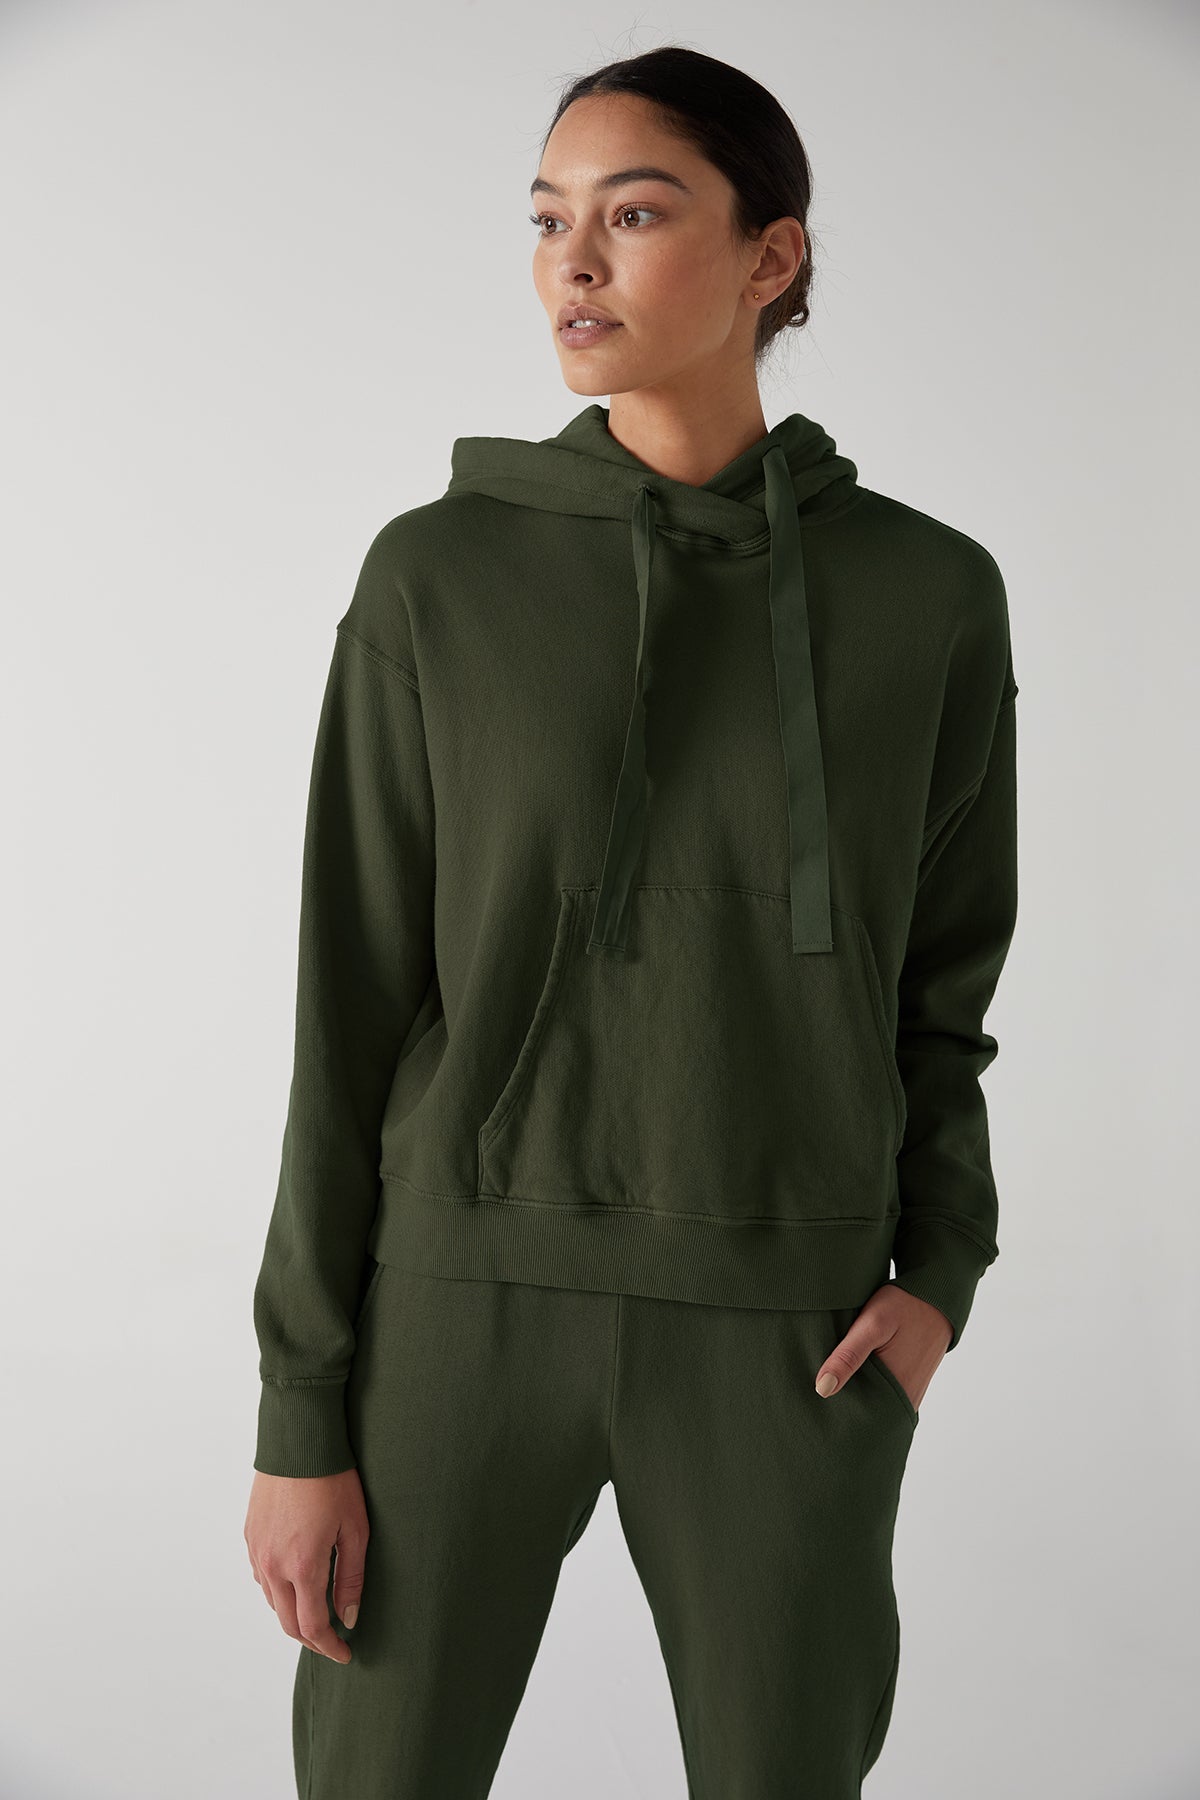 ojai hoodie dillweed front and zuma pant dillweed-35490669002945